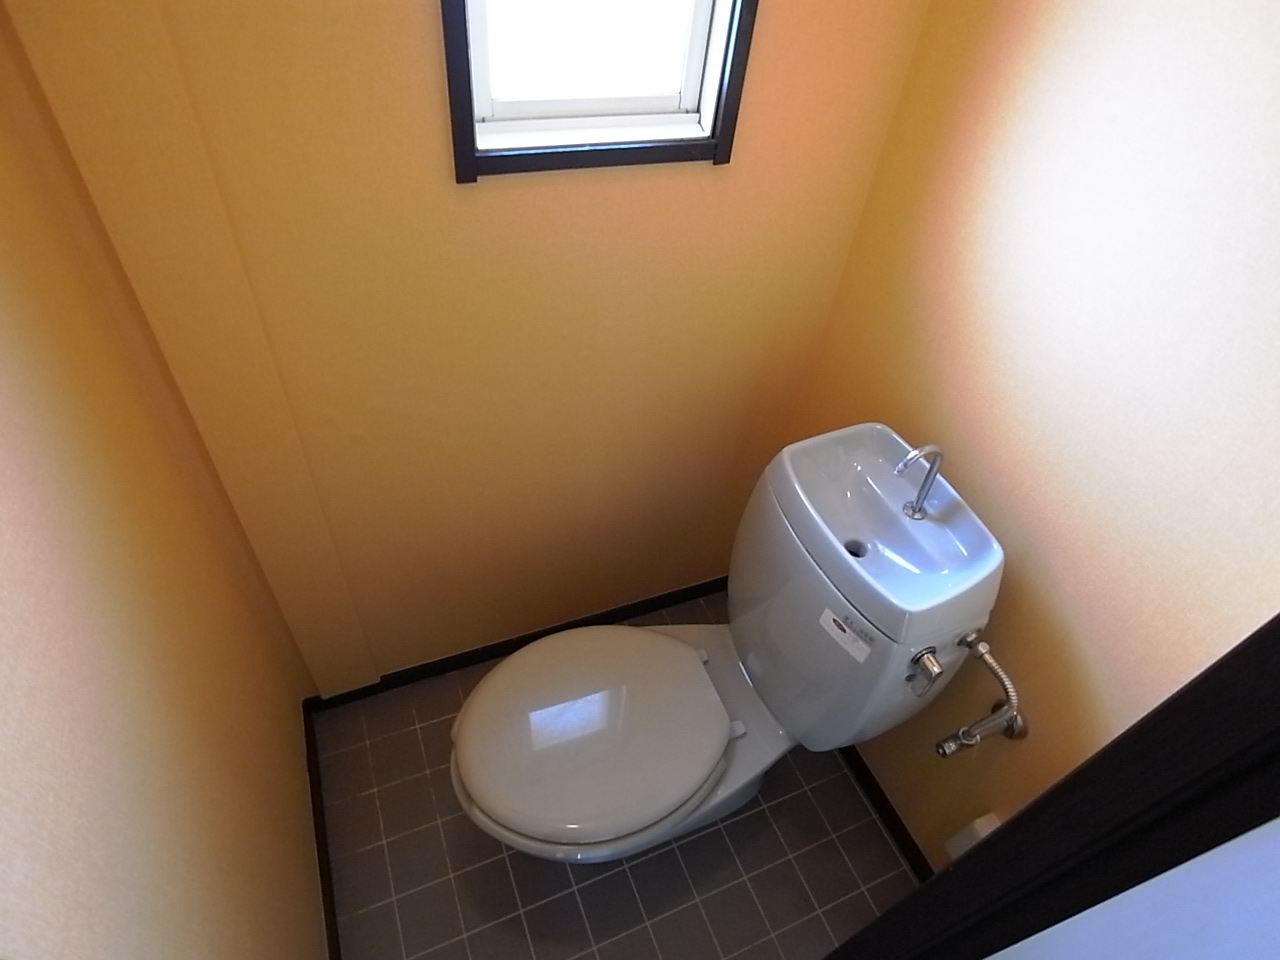 Toilet. Same property reference photograph